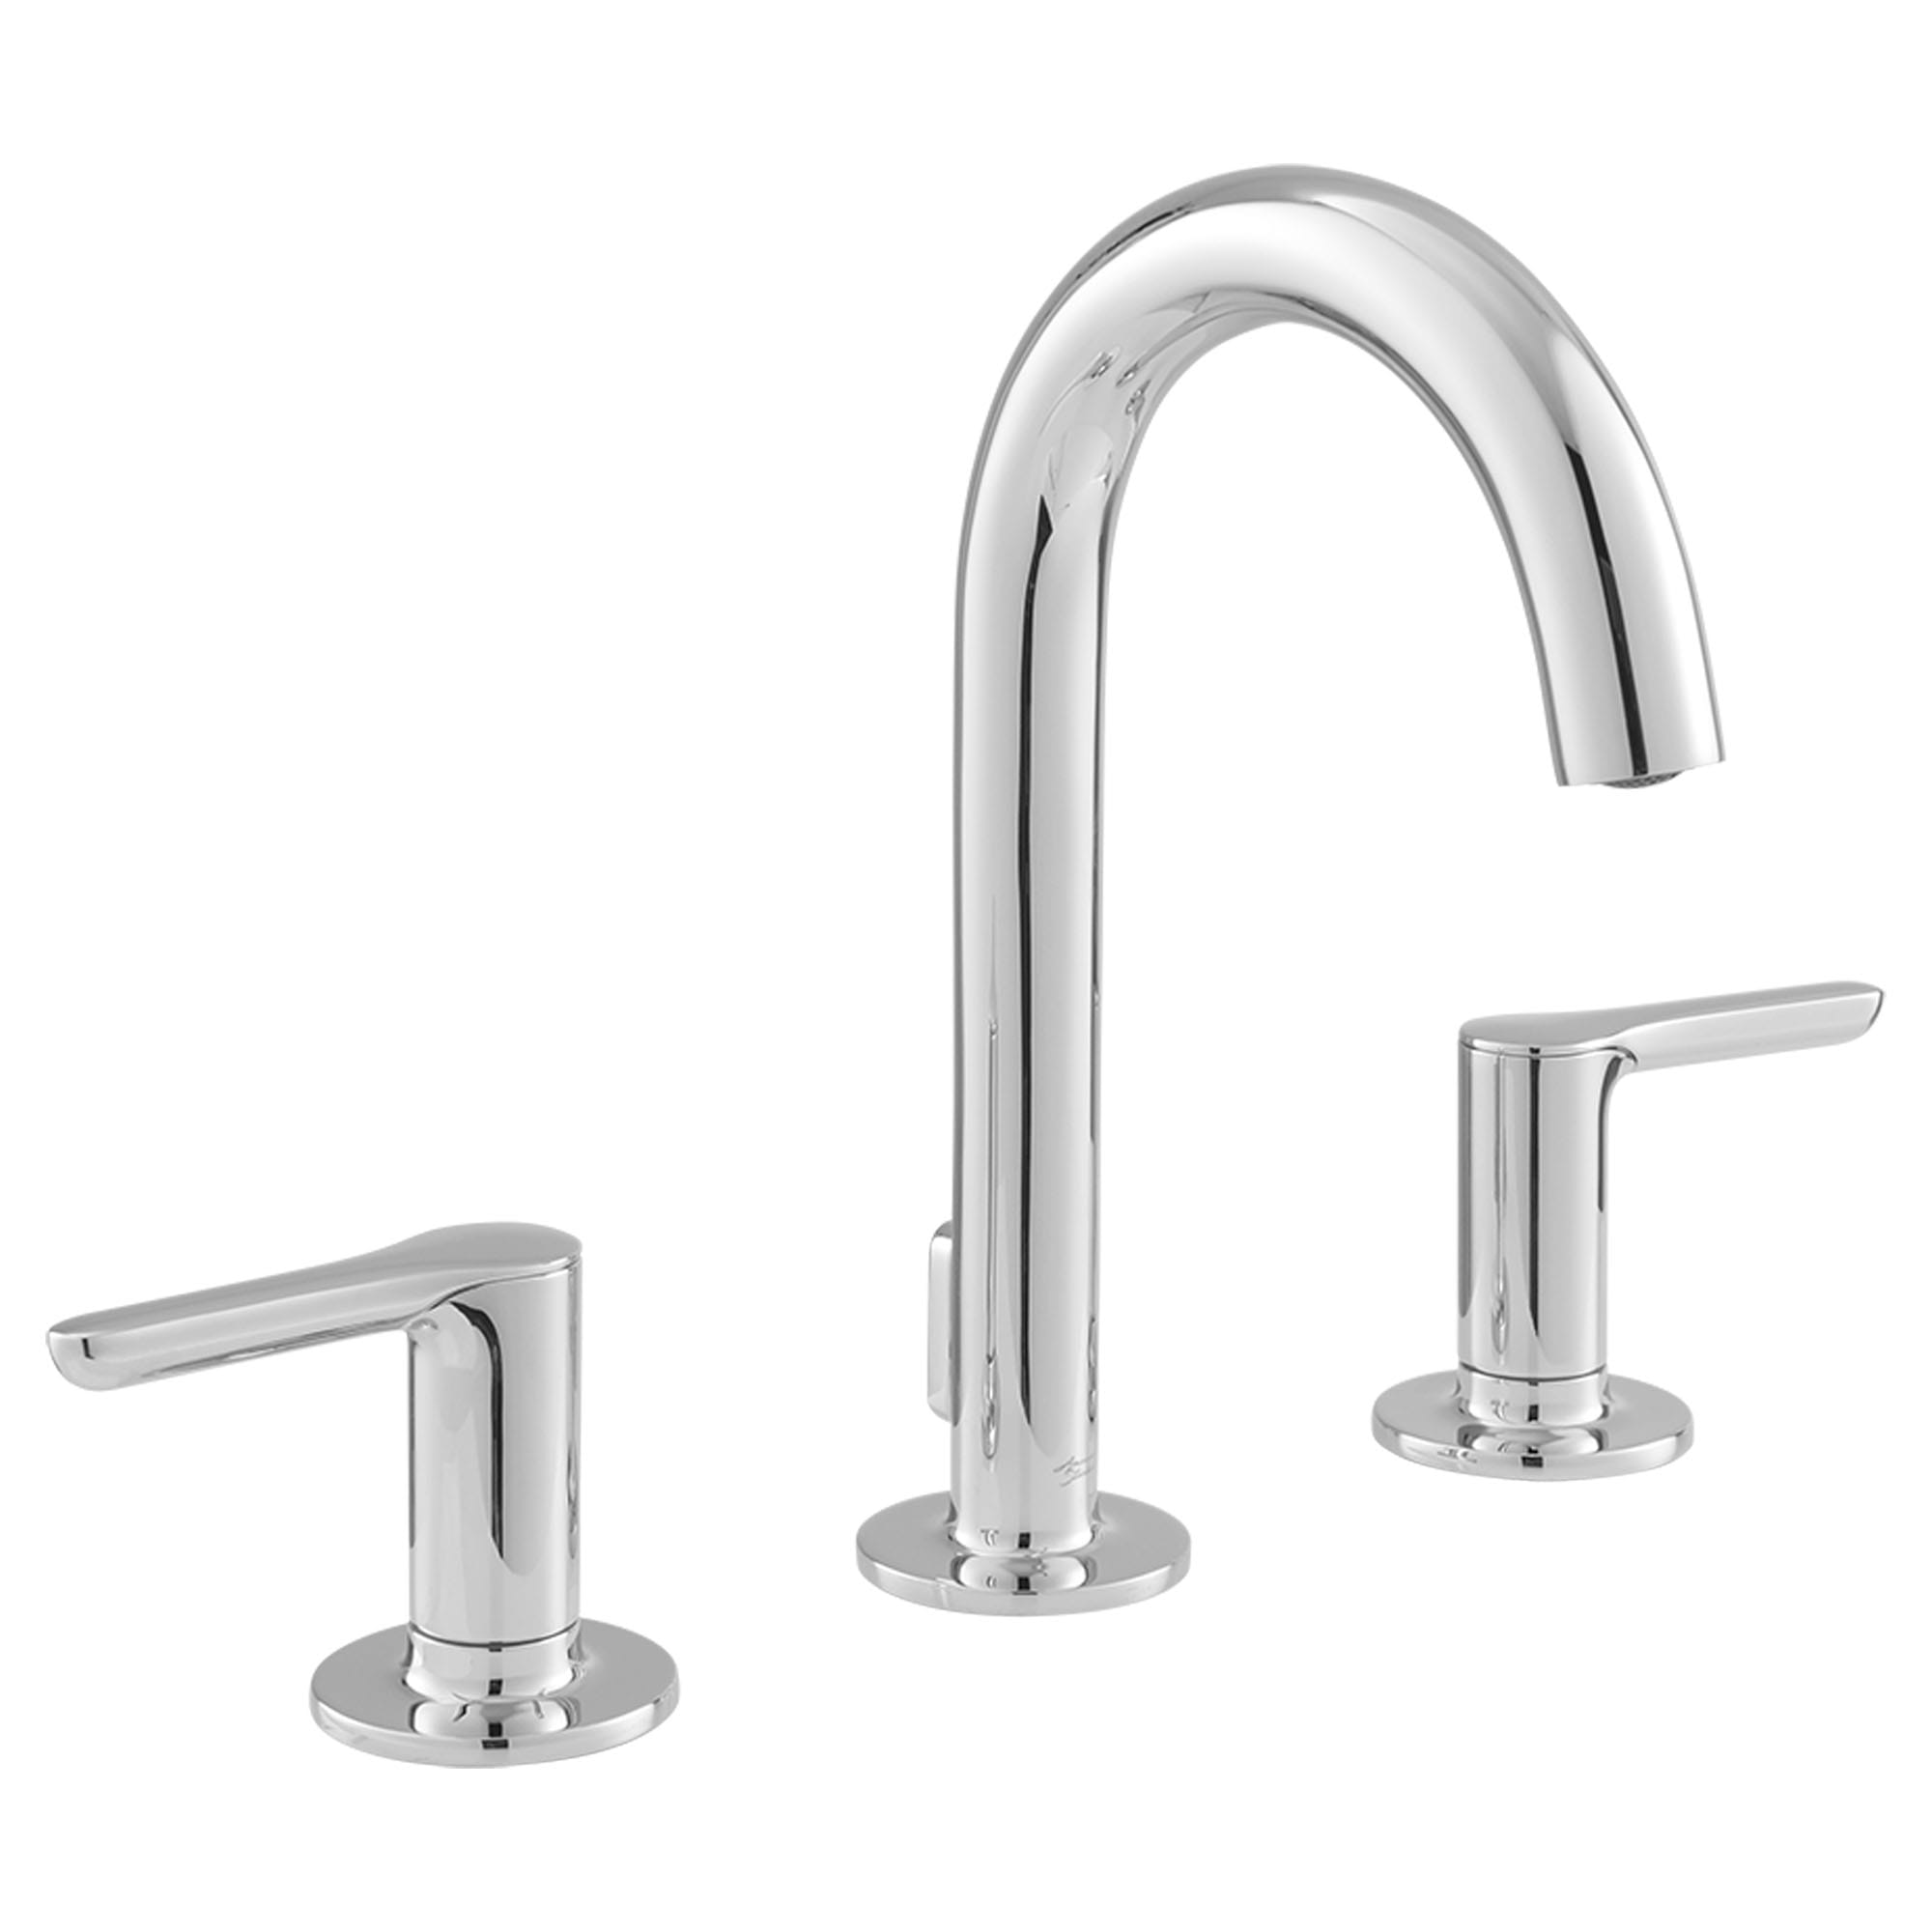 Studio® S 8-Inch Widespread 2-Handle Bathroom Faucet 1.2 gpm/4.5 L/min With  Lever Handles